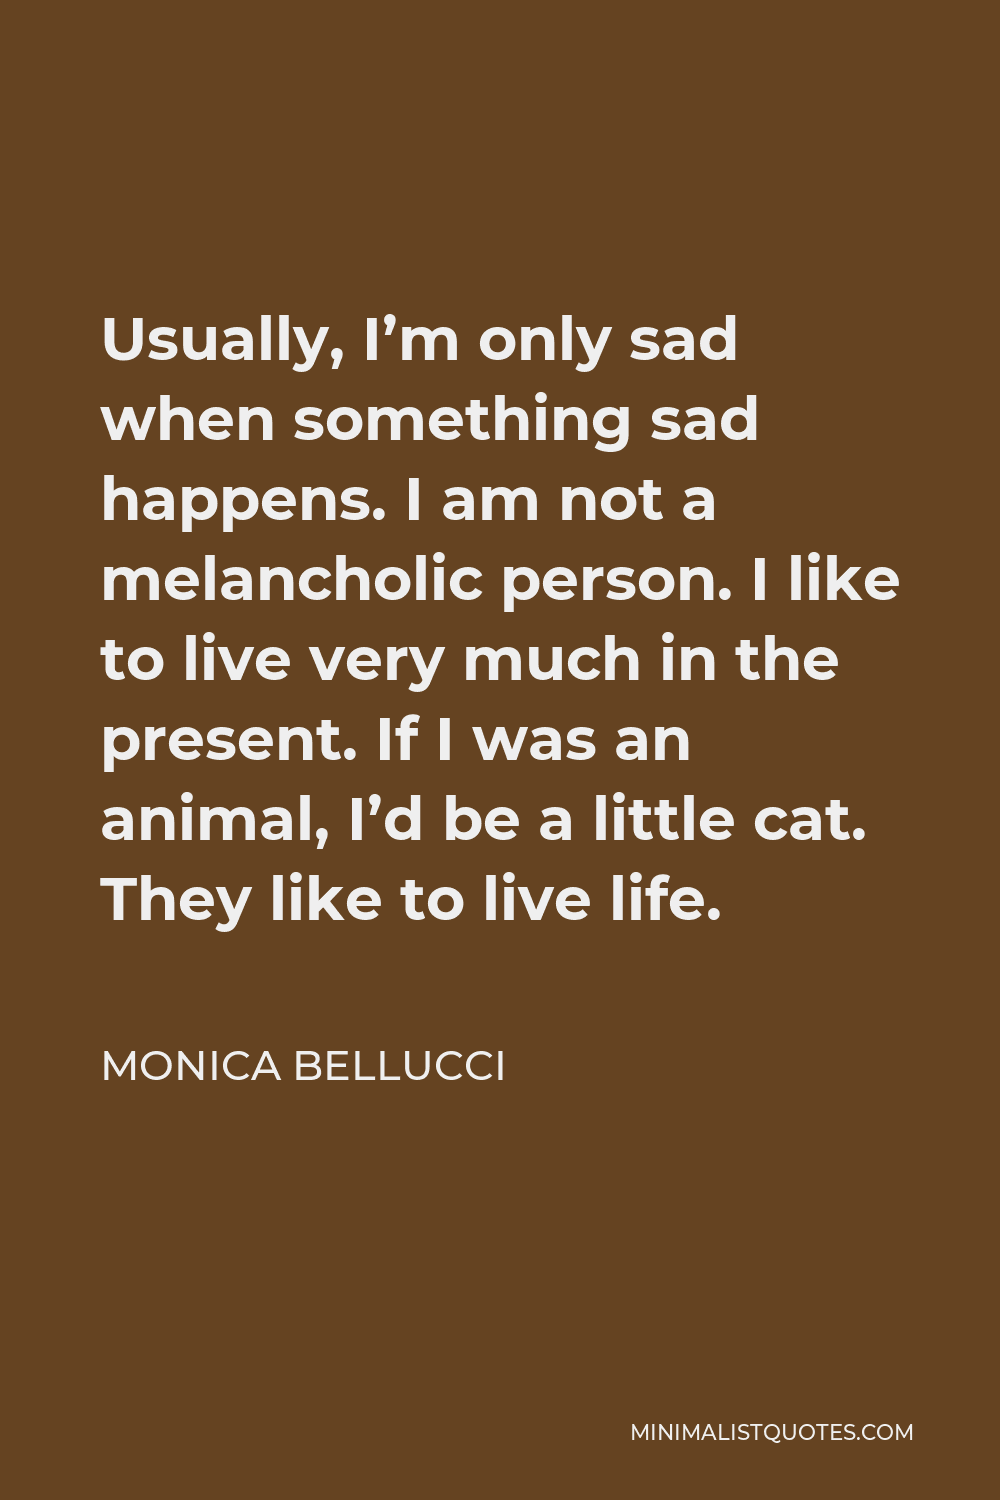 Monica Bellucci Quote - Usually, I’m only sad when something sad happens. I am not a melancholic person. I like to live very much in the present. If I was an animal, I’d be a little cat. They like to live life.